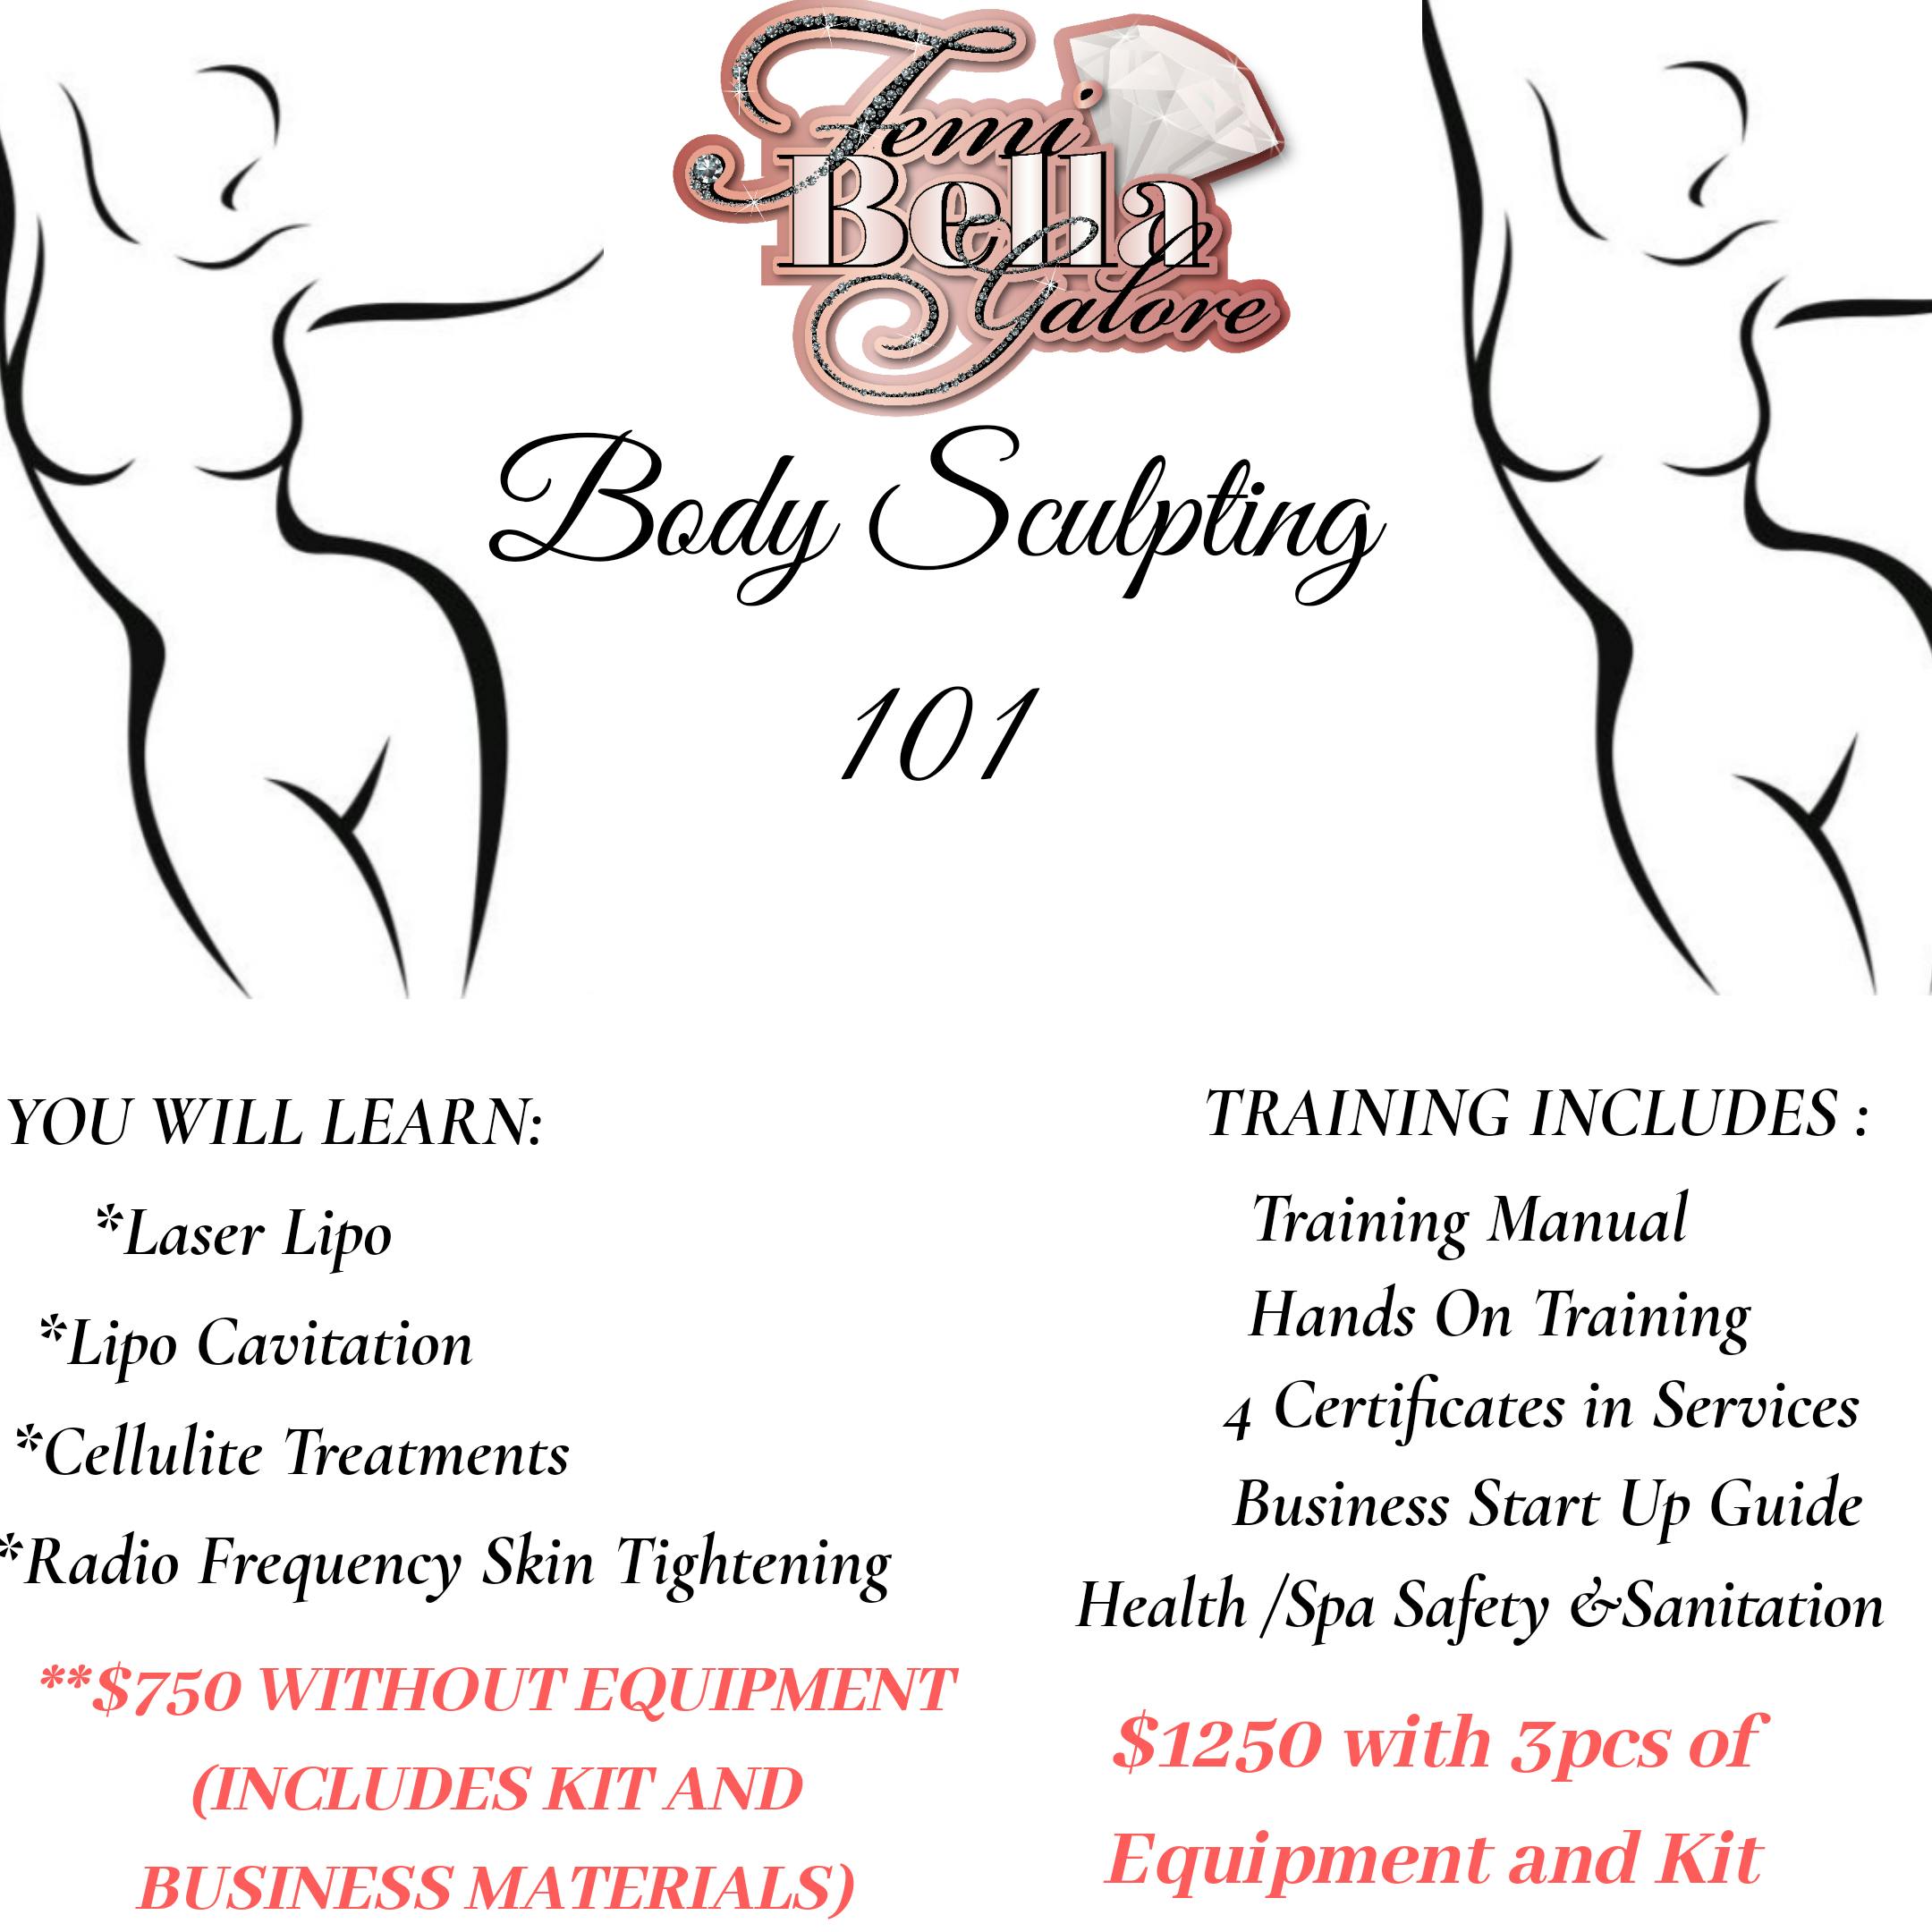 Body Sculpting Certification 24 Aug 19